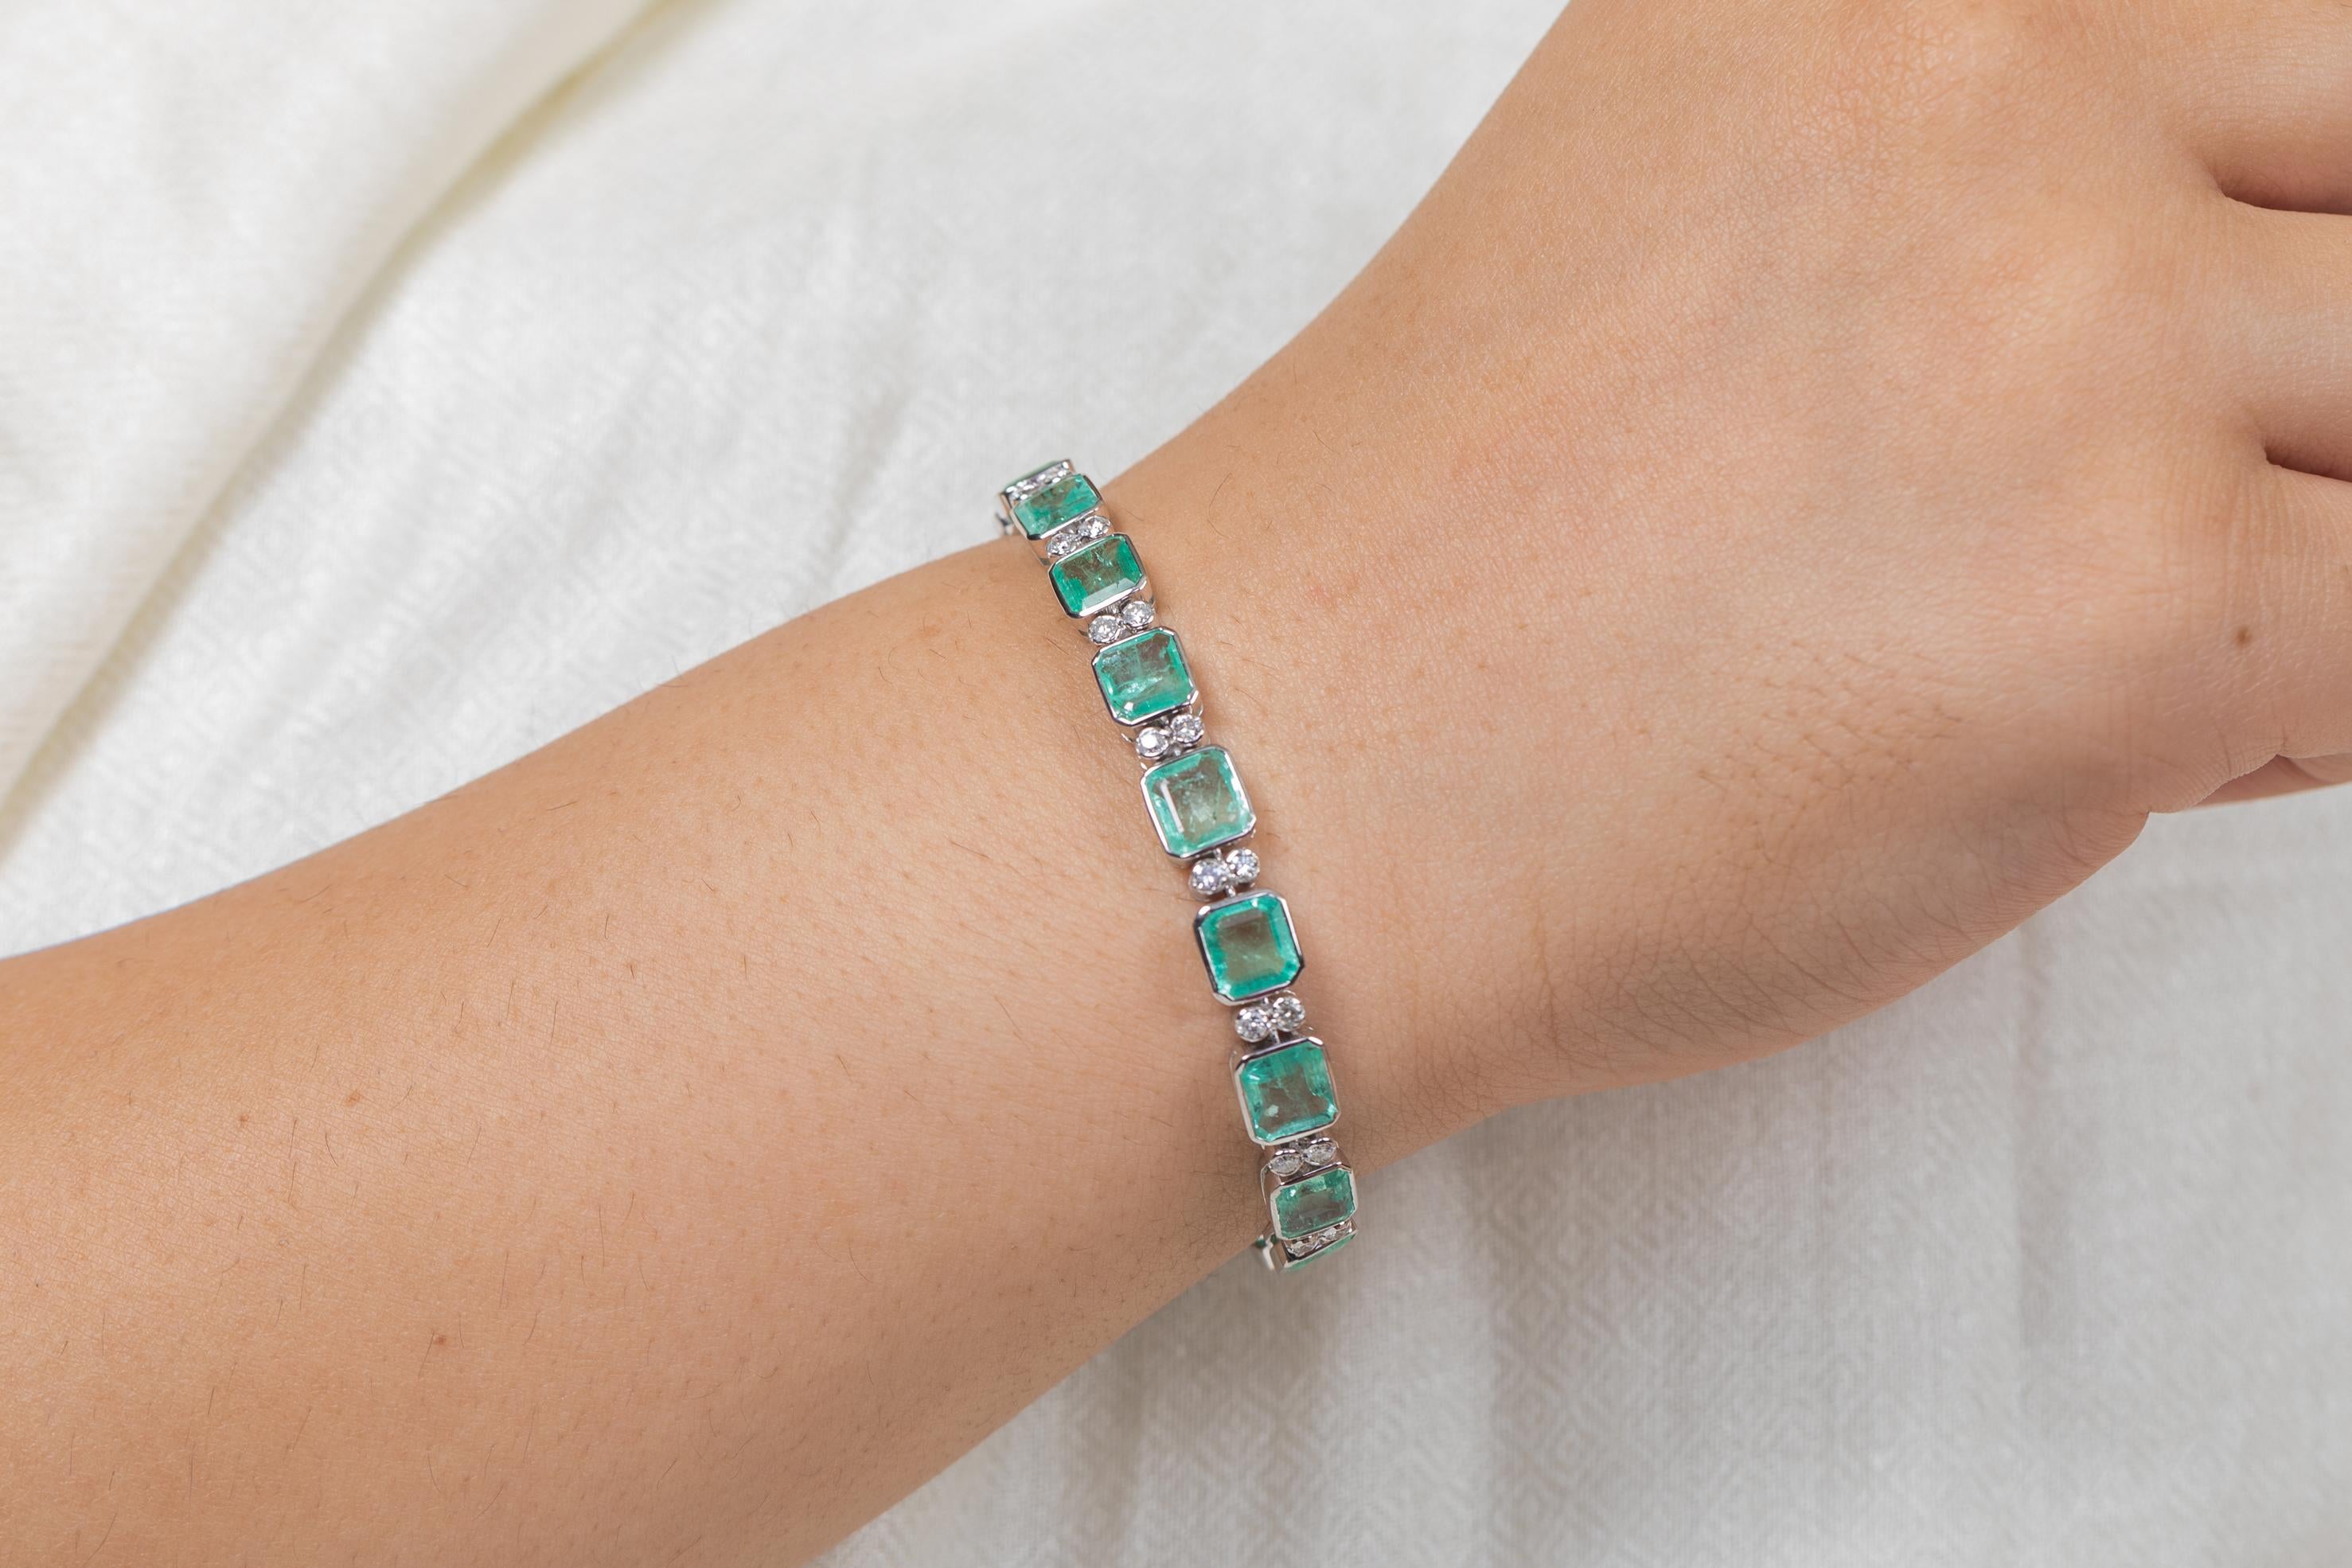 Emerald and Diamond bracelet in 18K Gold. It has a perfect octagon cut gemstone to make you stand out on any occasion or an event.
A tennis bracelet is an essential piece of jewelry when it comes to your wedding day. The sleek and elegant style